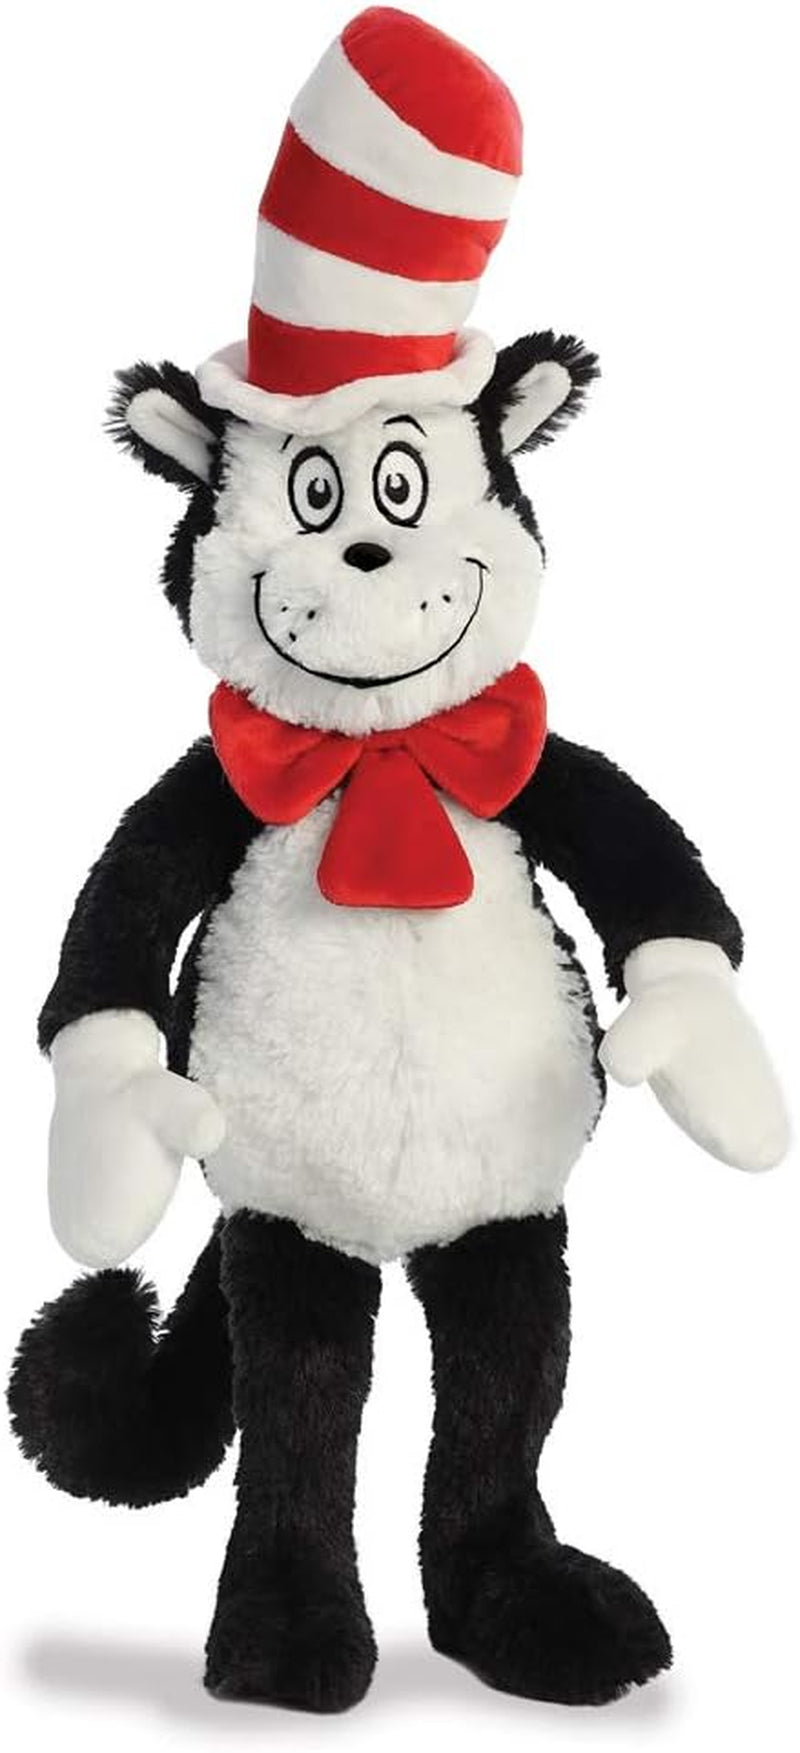 Aurora, 15910, Dr Seuss, the Cat in the Hat, 20In, Soft Toy, Multi-Coloured, 44Cm